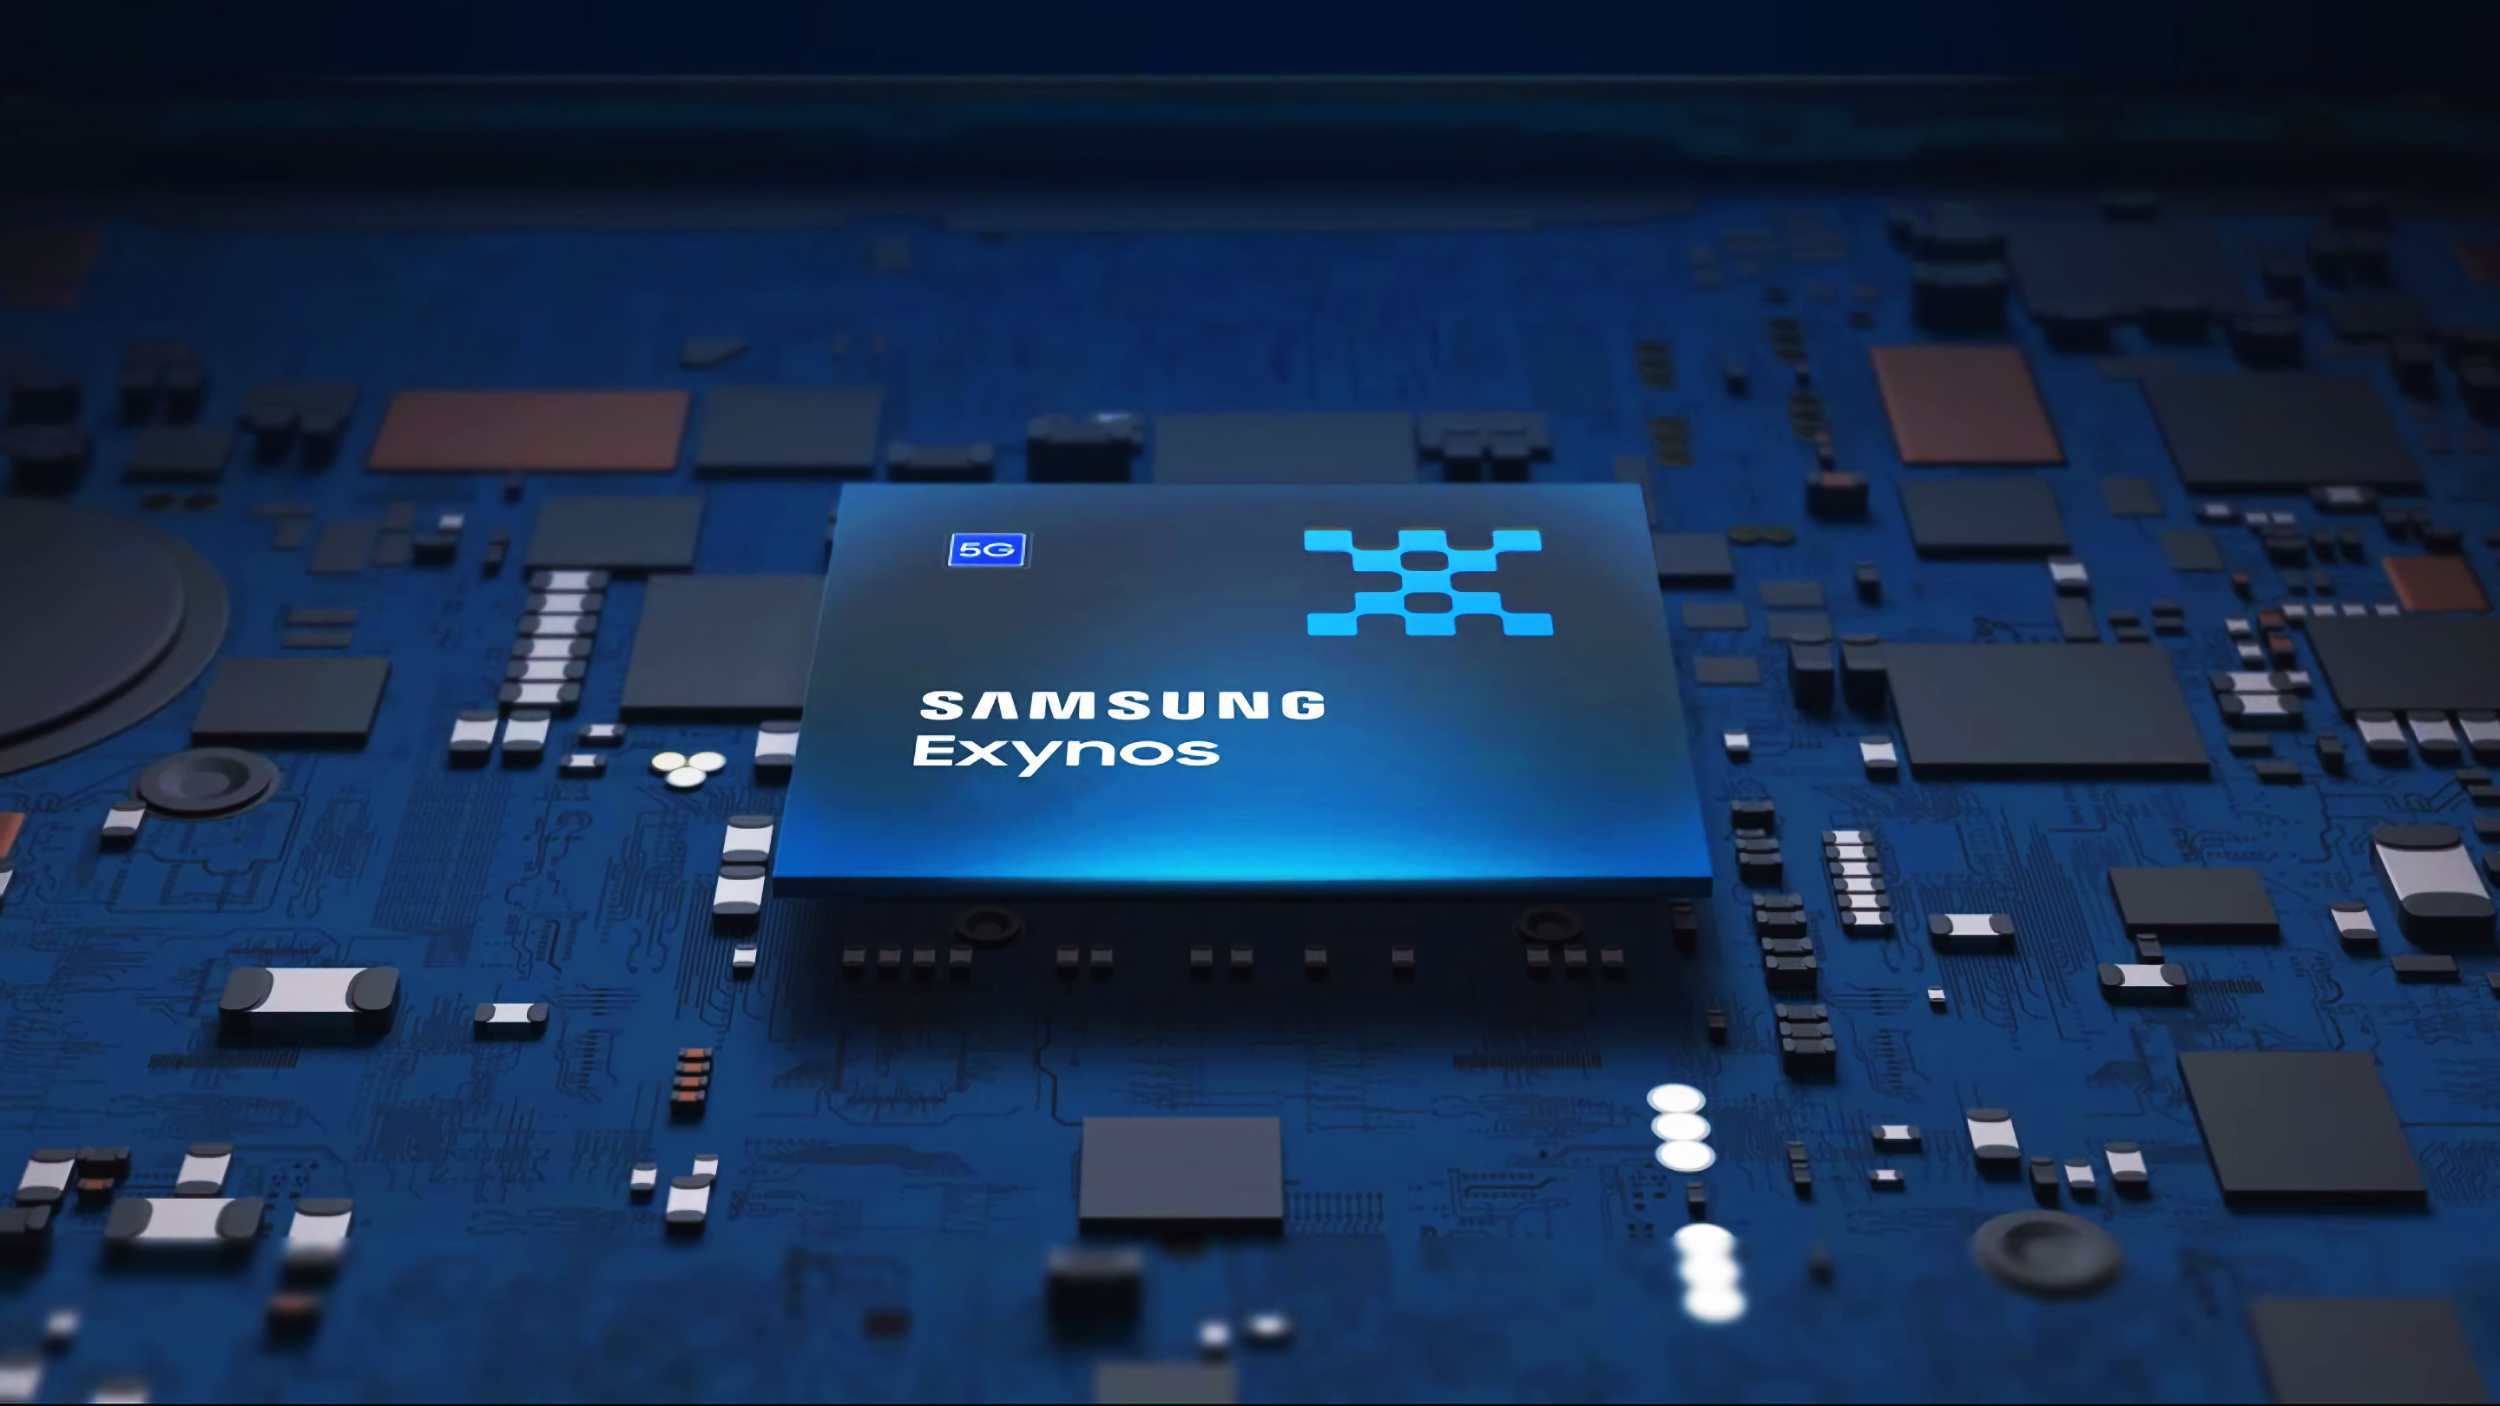 Insider: Samsung's next top-end chip is codenamed Quadra and will be built using a 3nm process technology